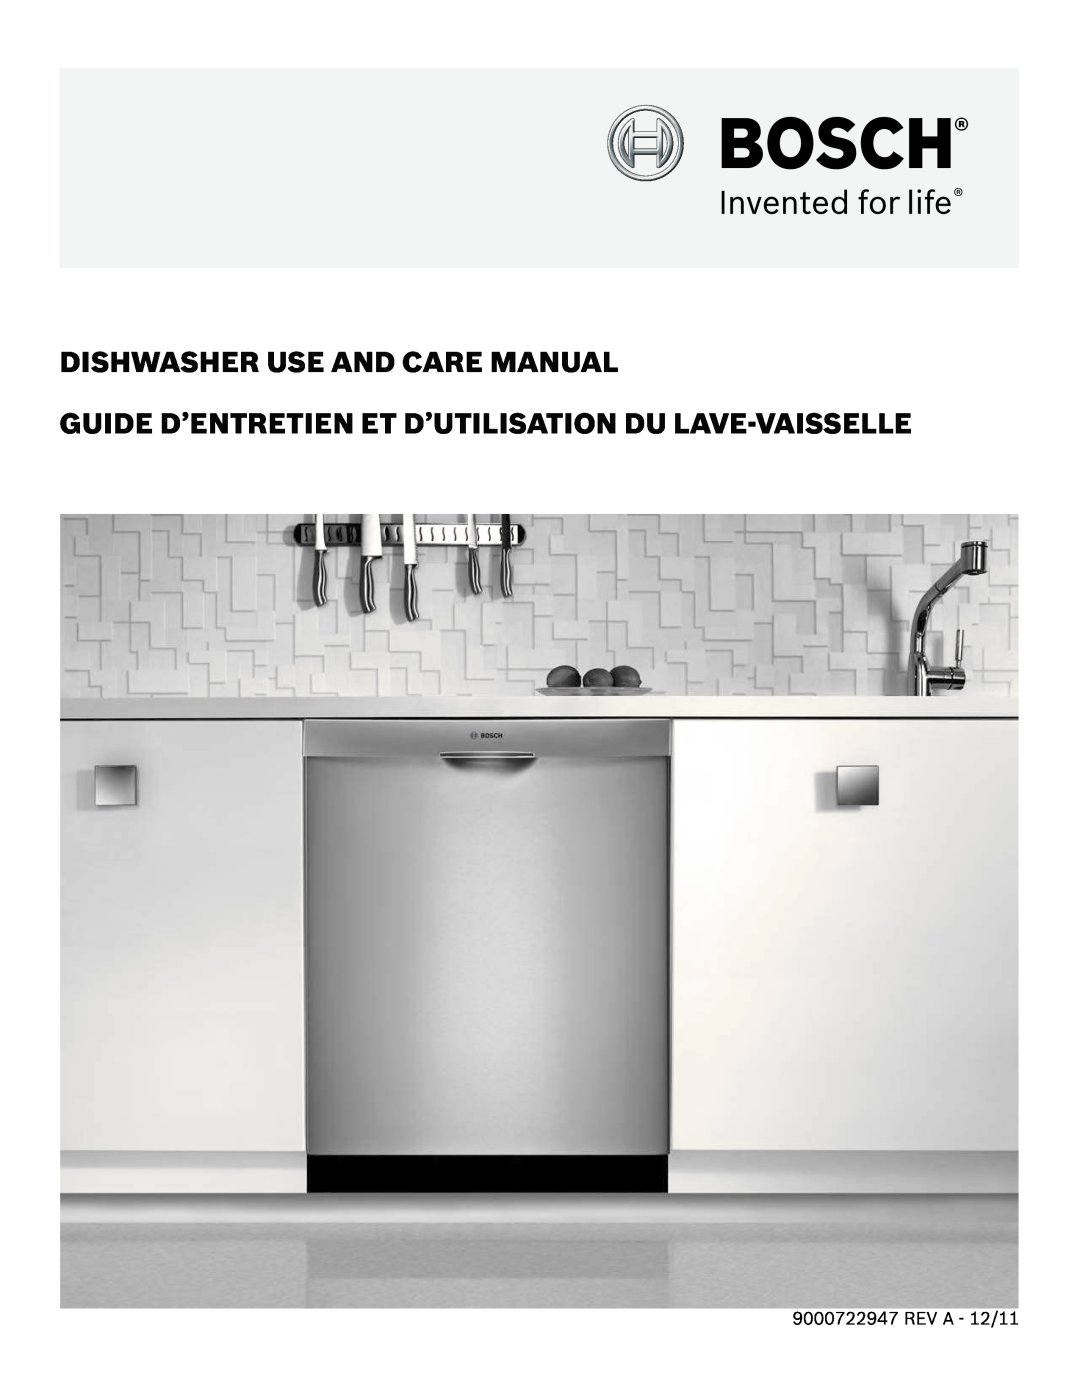 Bosch Appliances SHE43R5XUC manual Dishwasher Use And Care Manual, REV A - 12/11 